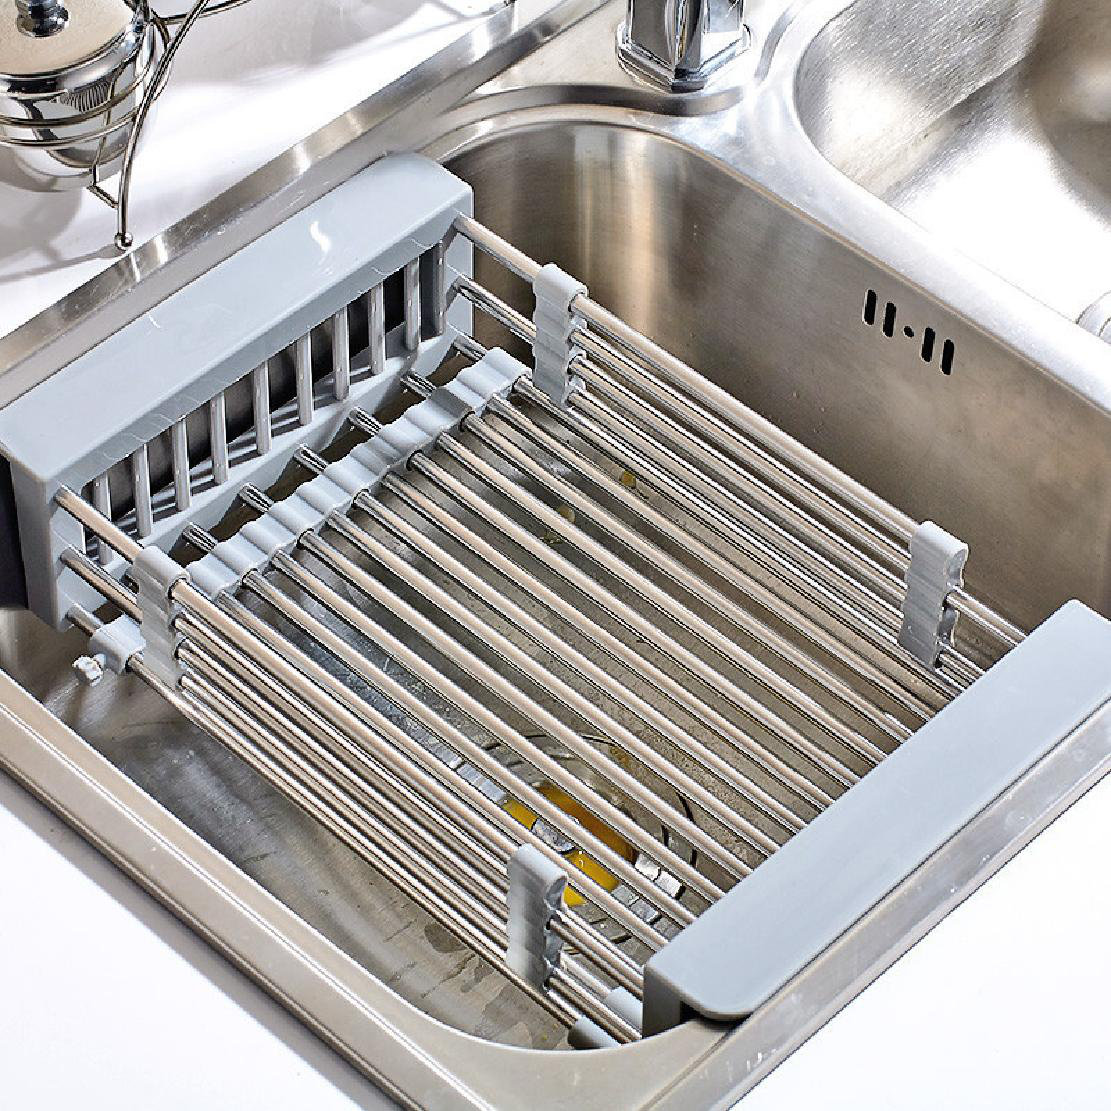 Captive Gala Stainless Steel in Sink Dish Rack